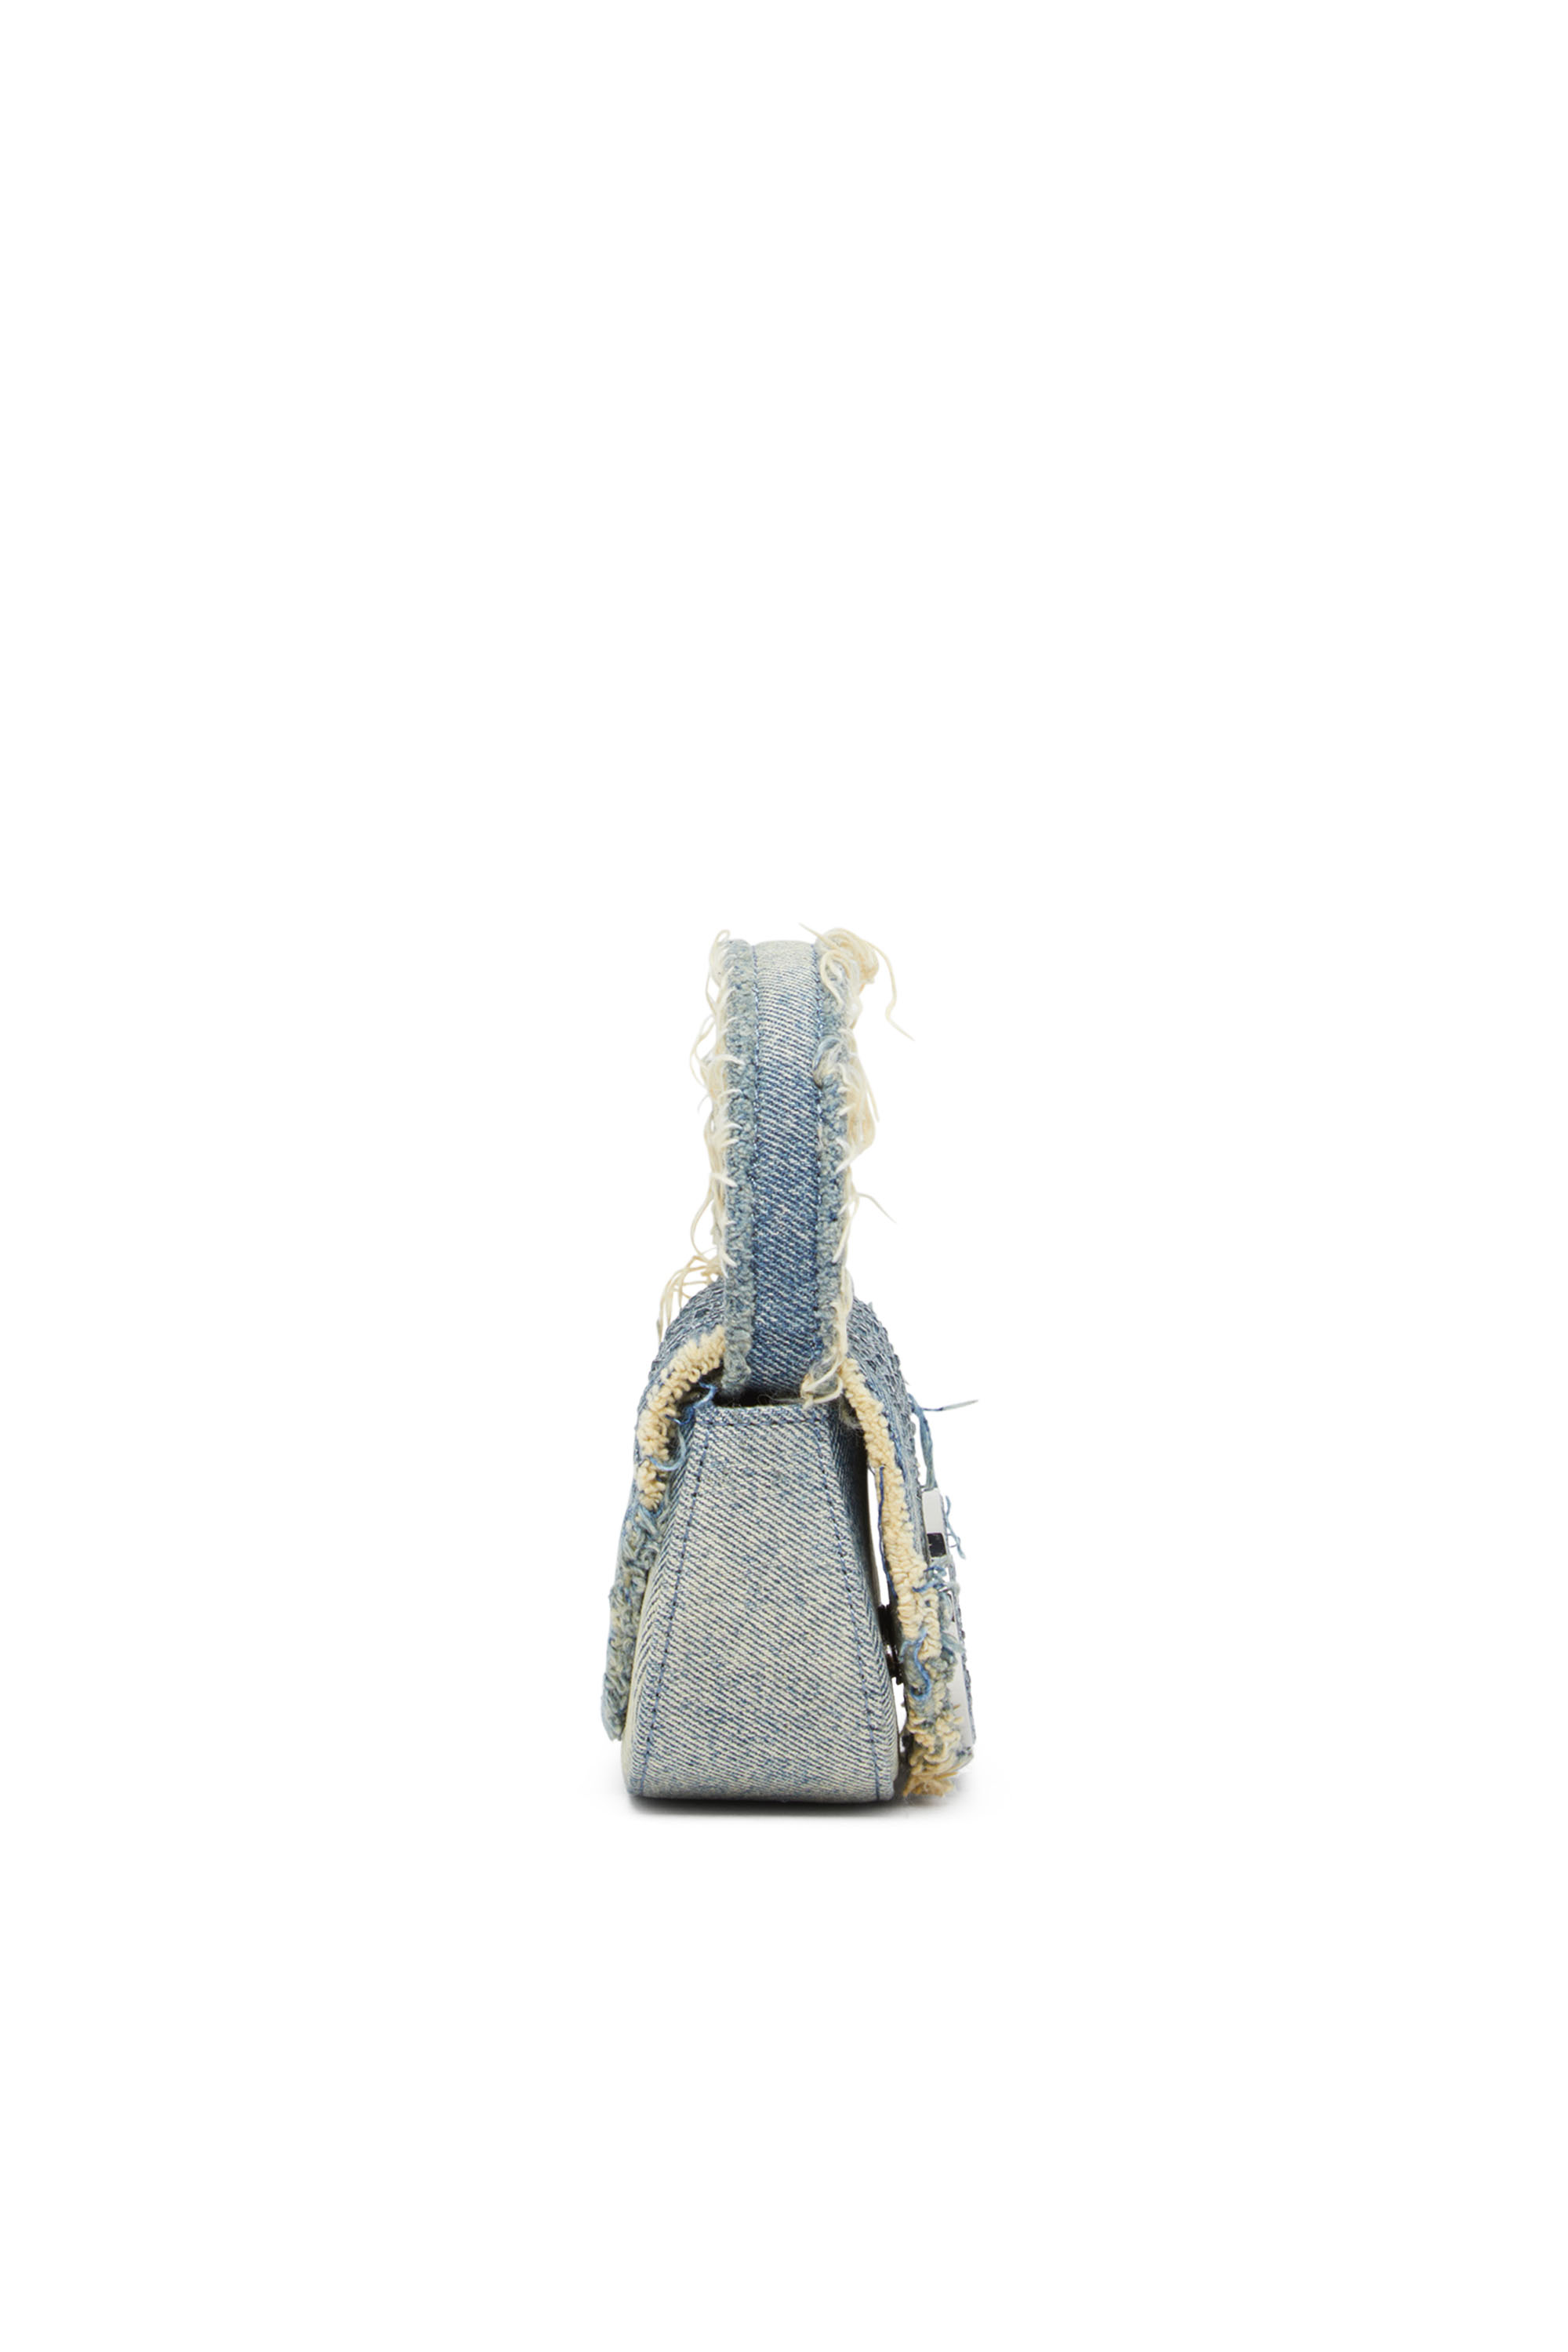 Diesel - 1DR XS, Woman 1DR XS-Iconic mini bag in denim and crystals in Blue - Image 3